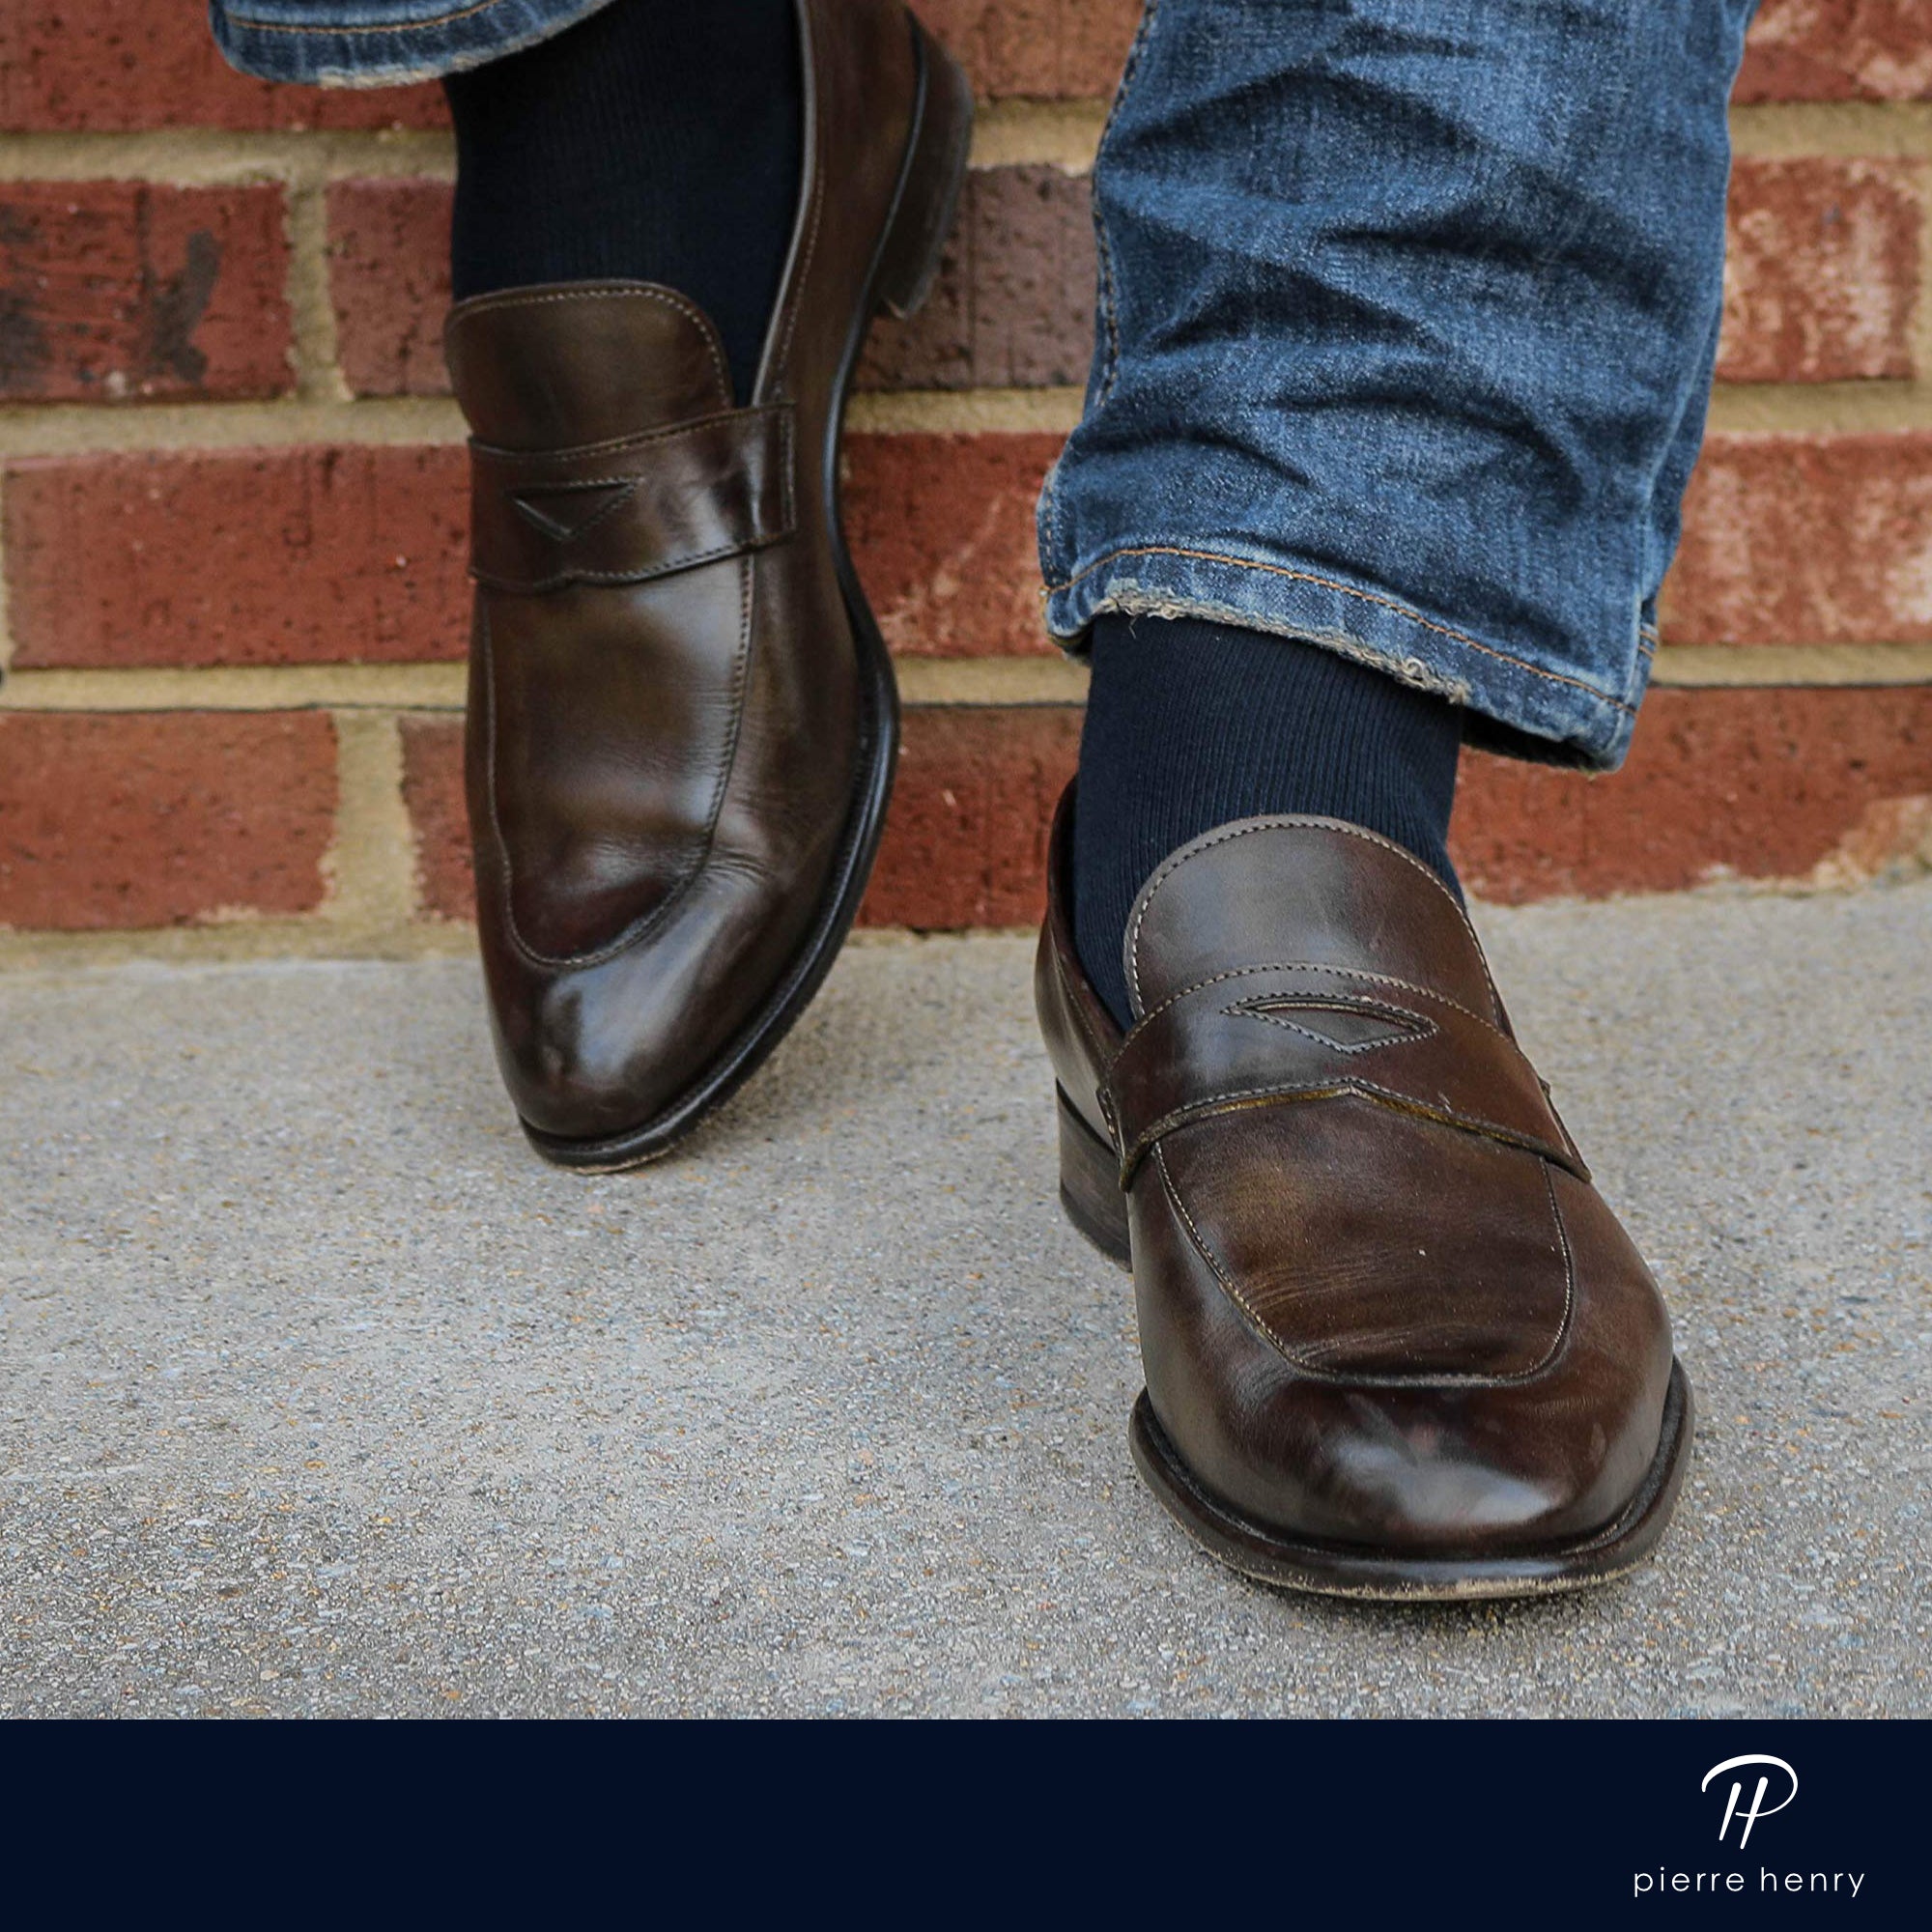 solid navy blue over the calf dress socks, brown dress shoes, blue jeans